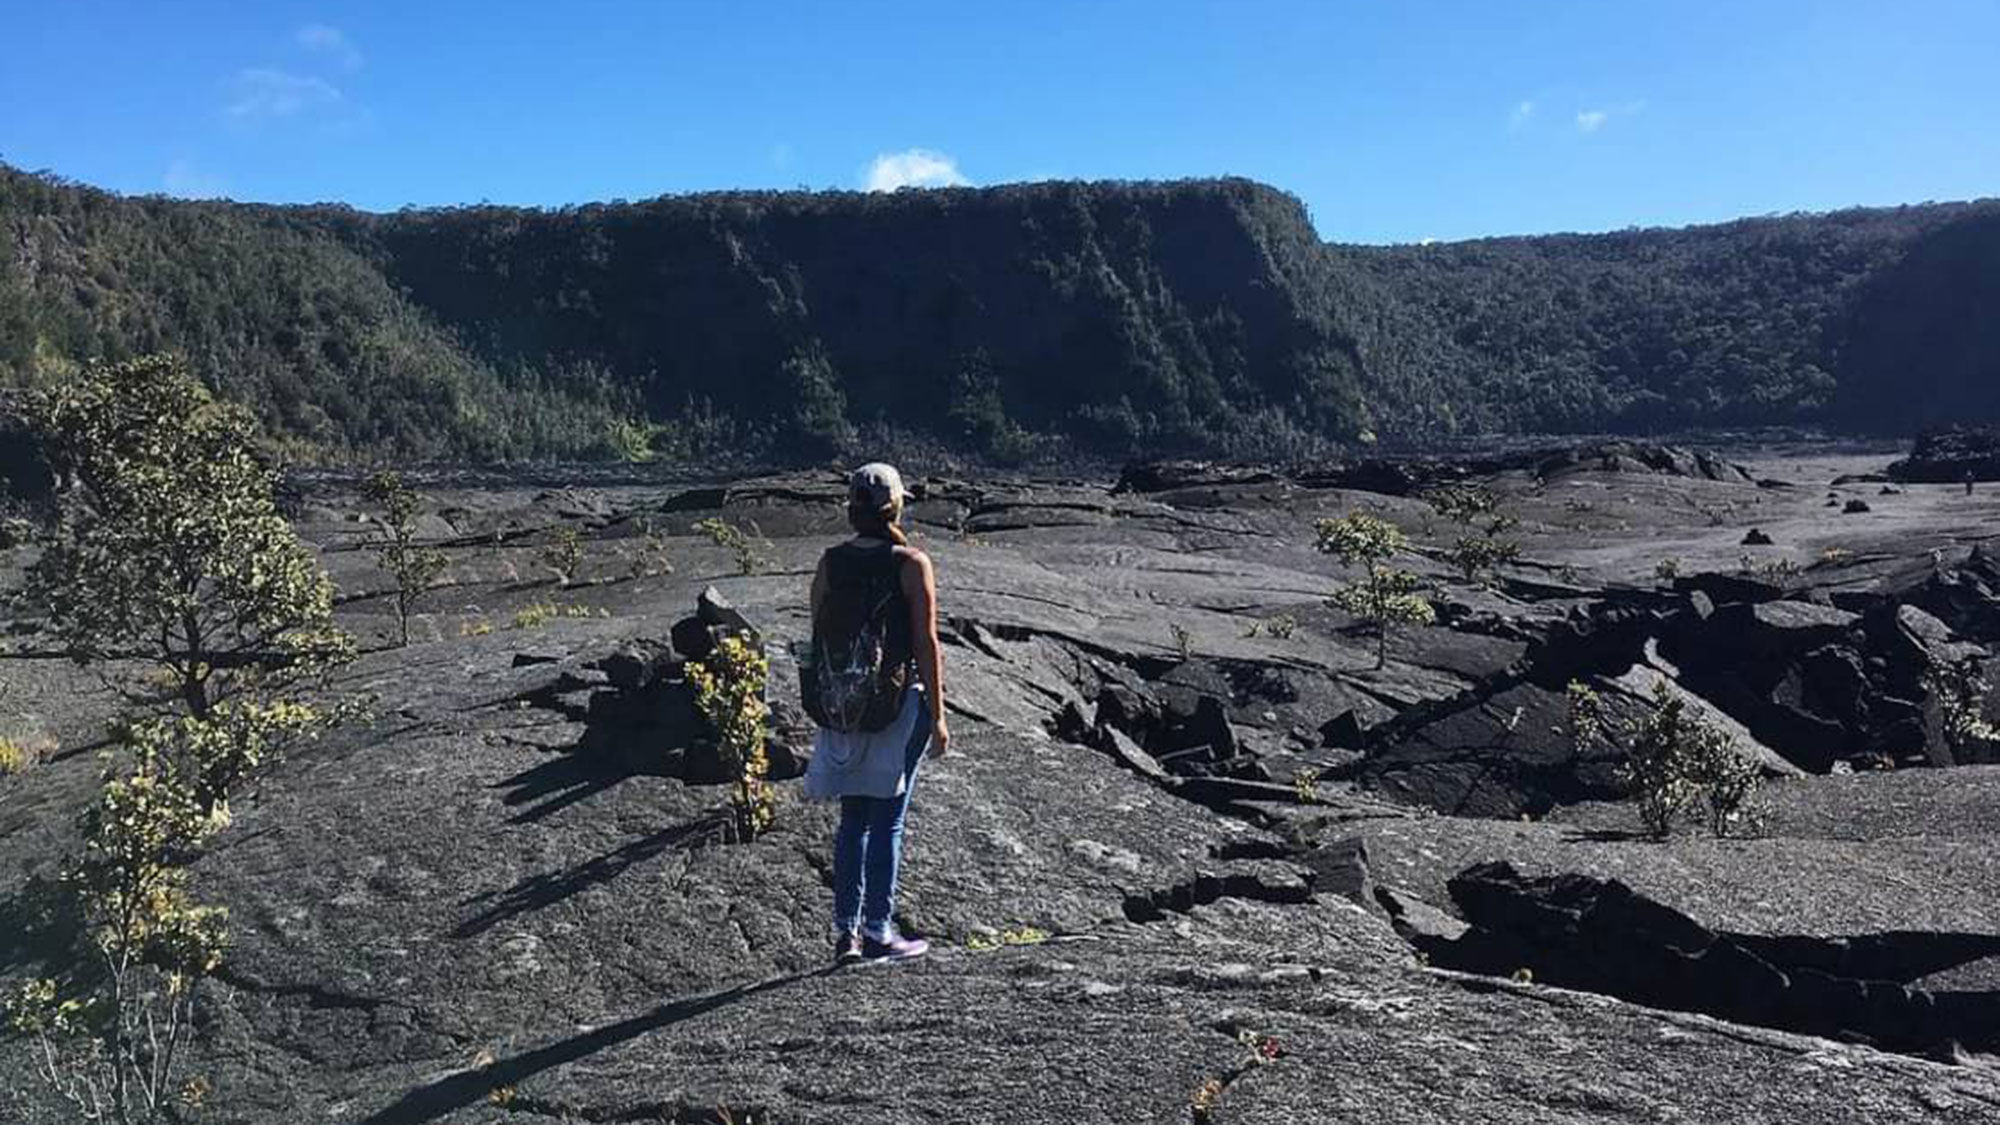 At Hawaii Volcanoes National Park, you can walk across the bottom of Kilauea Iki crater.